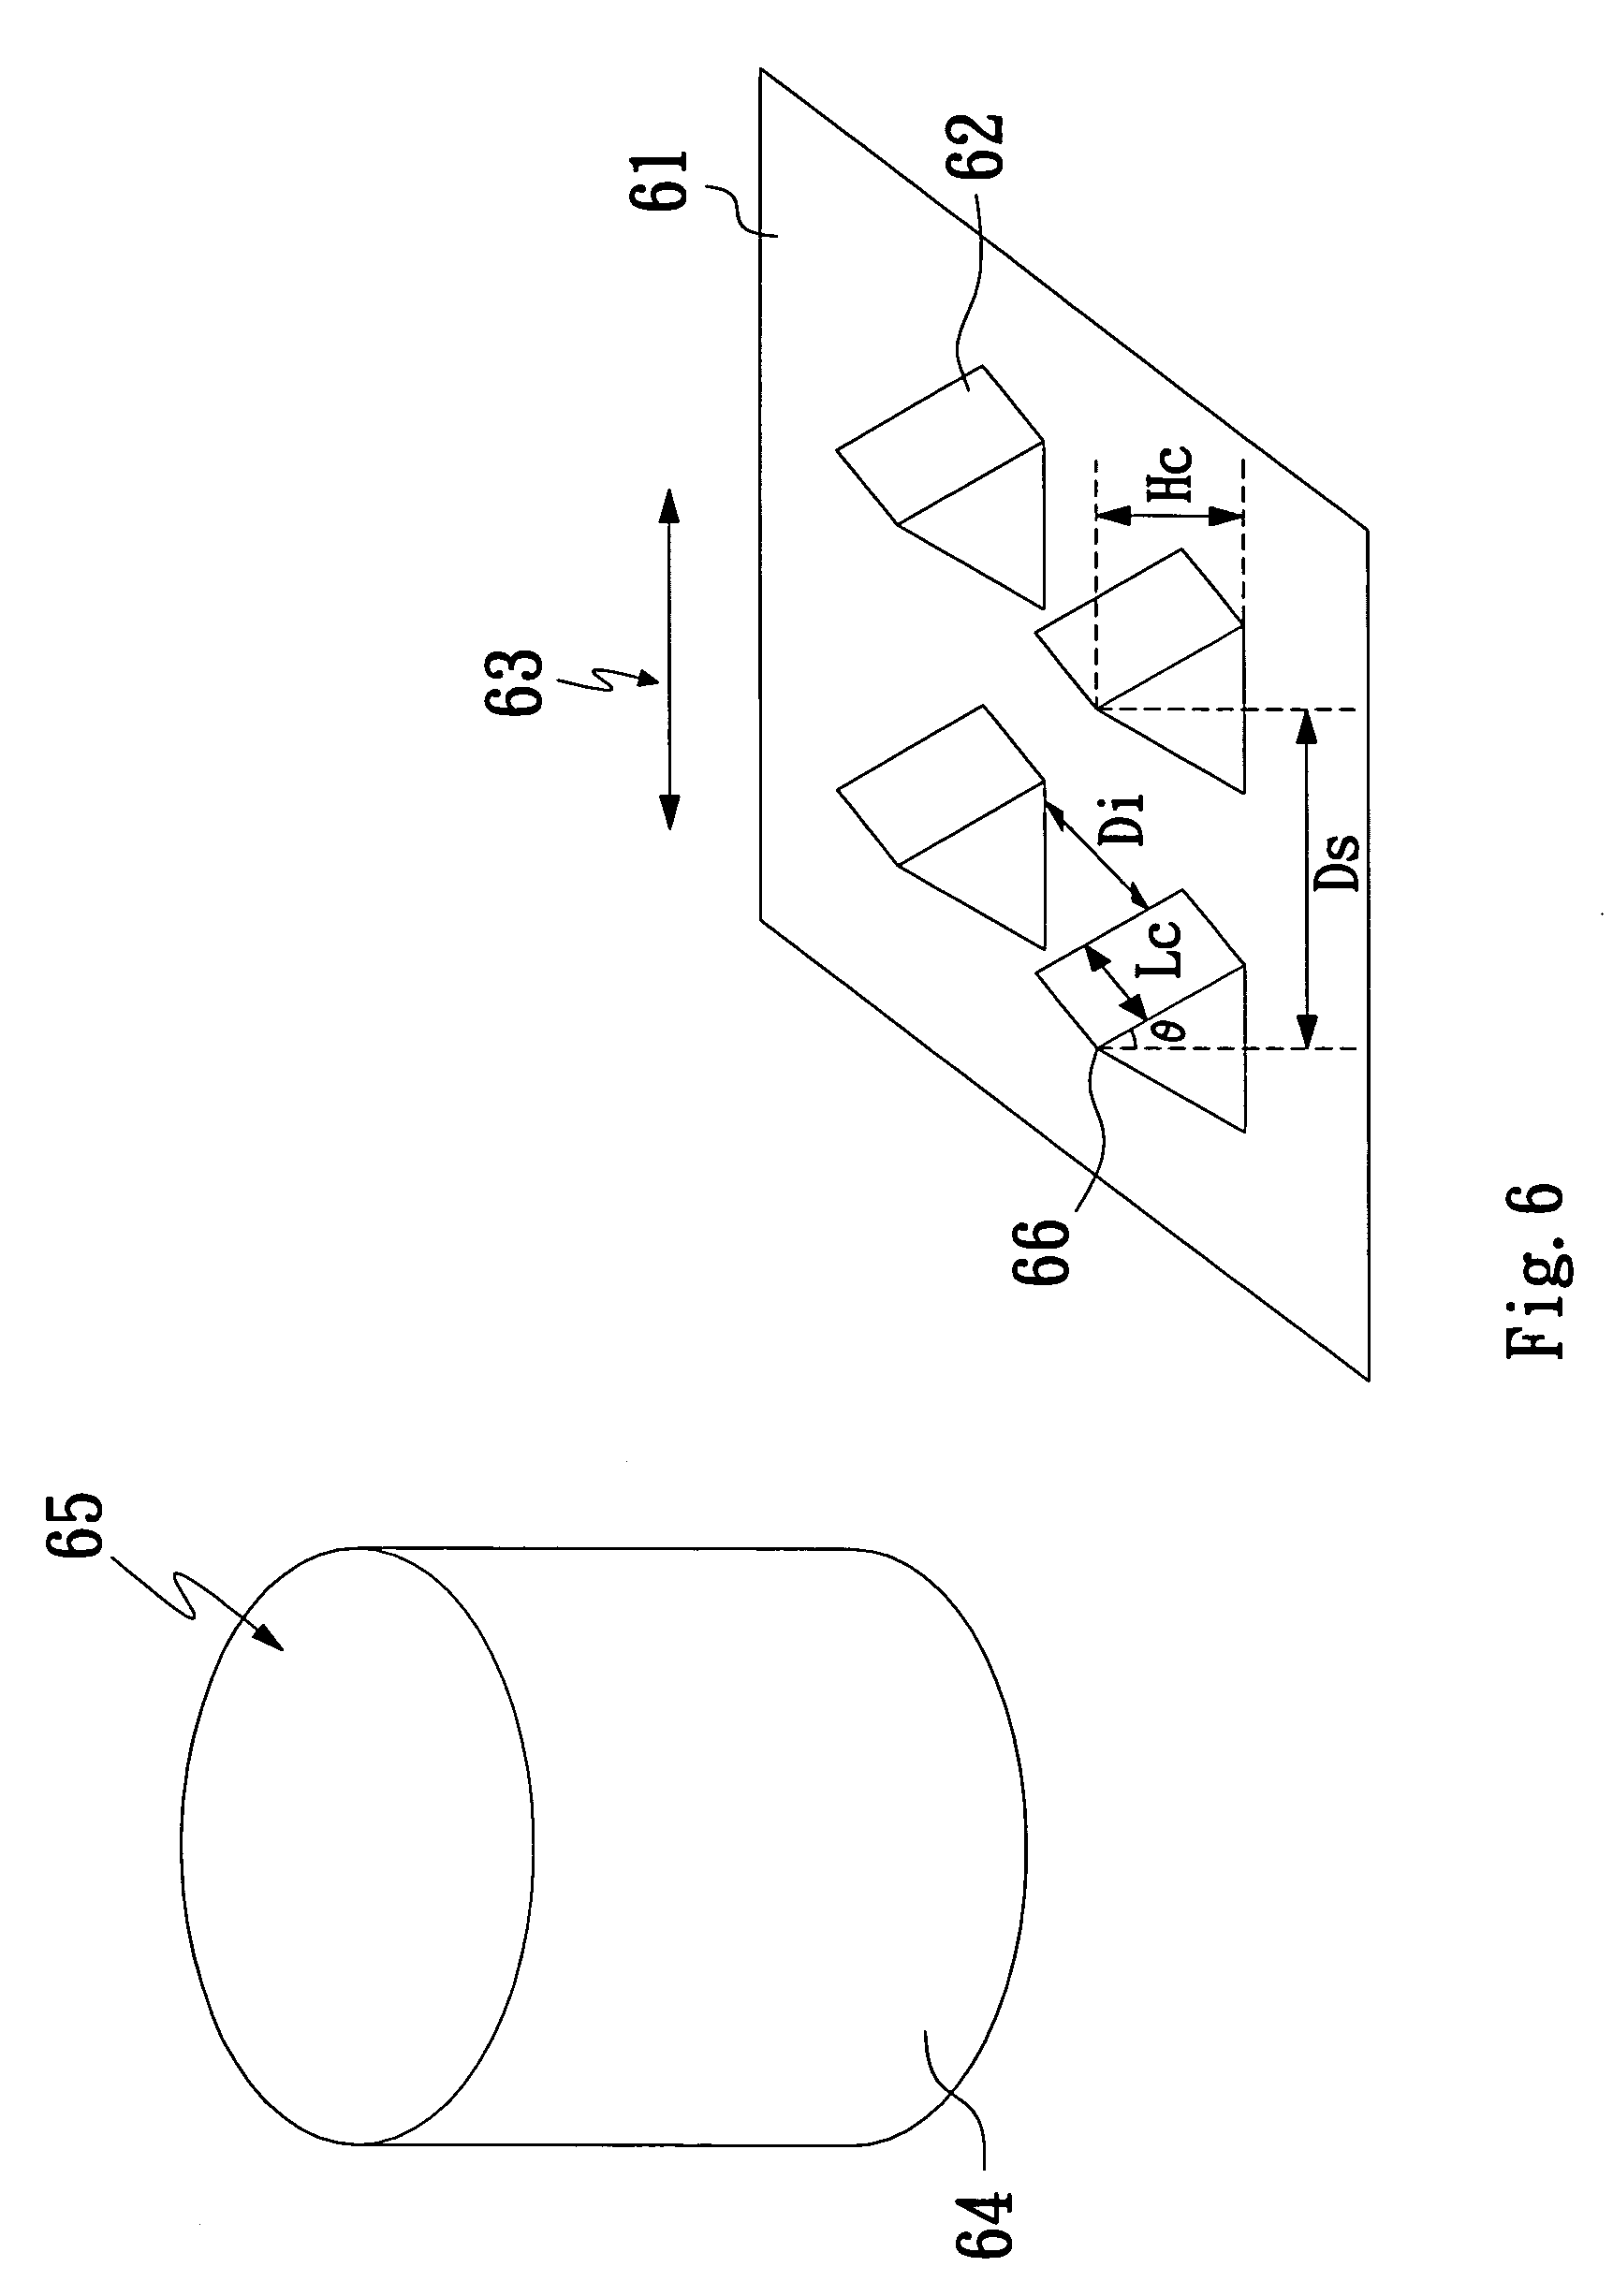 Method for generating polymeric wear particles